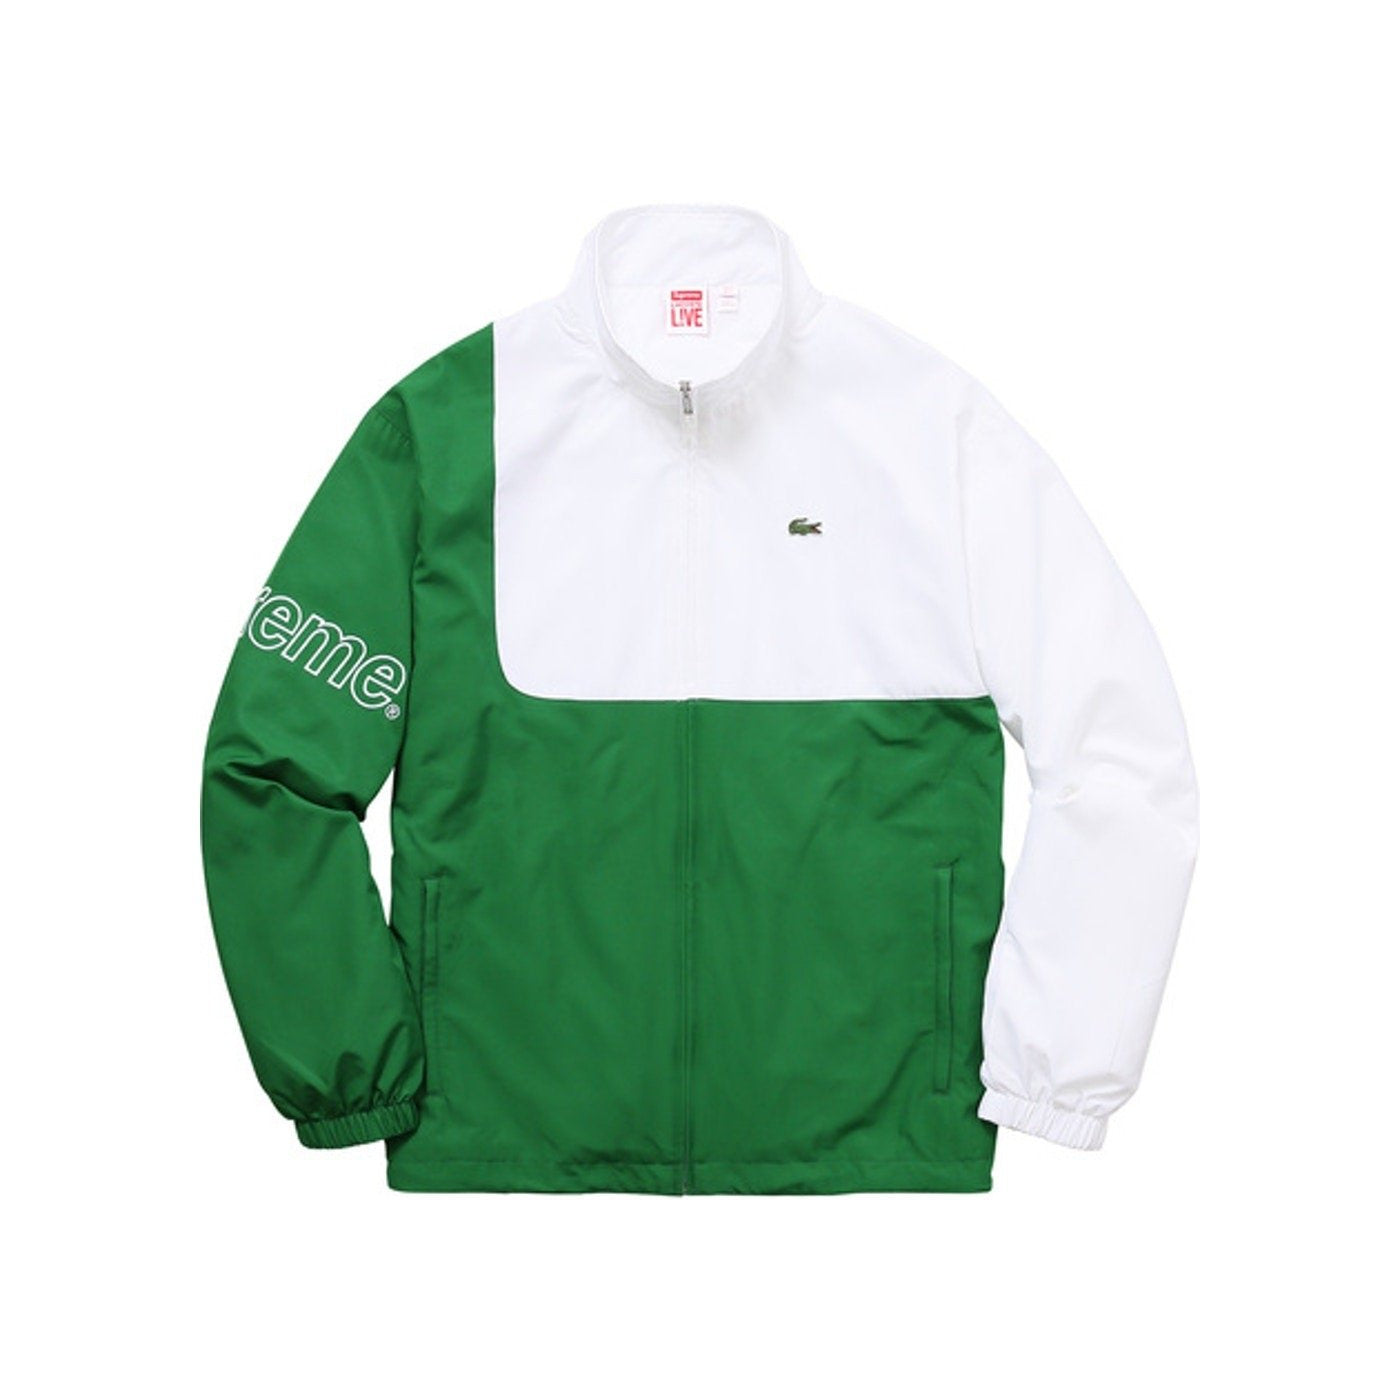 Supreme Lacoste Jacket "green and white" - Centrall Online